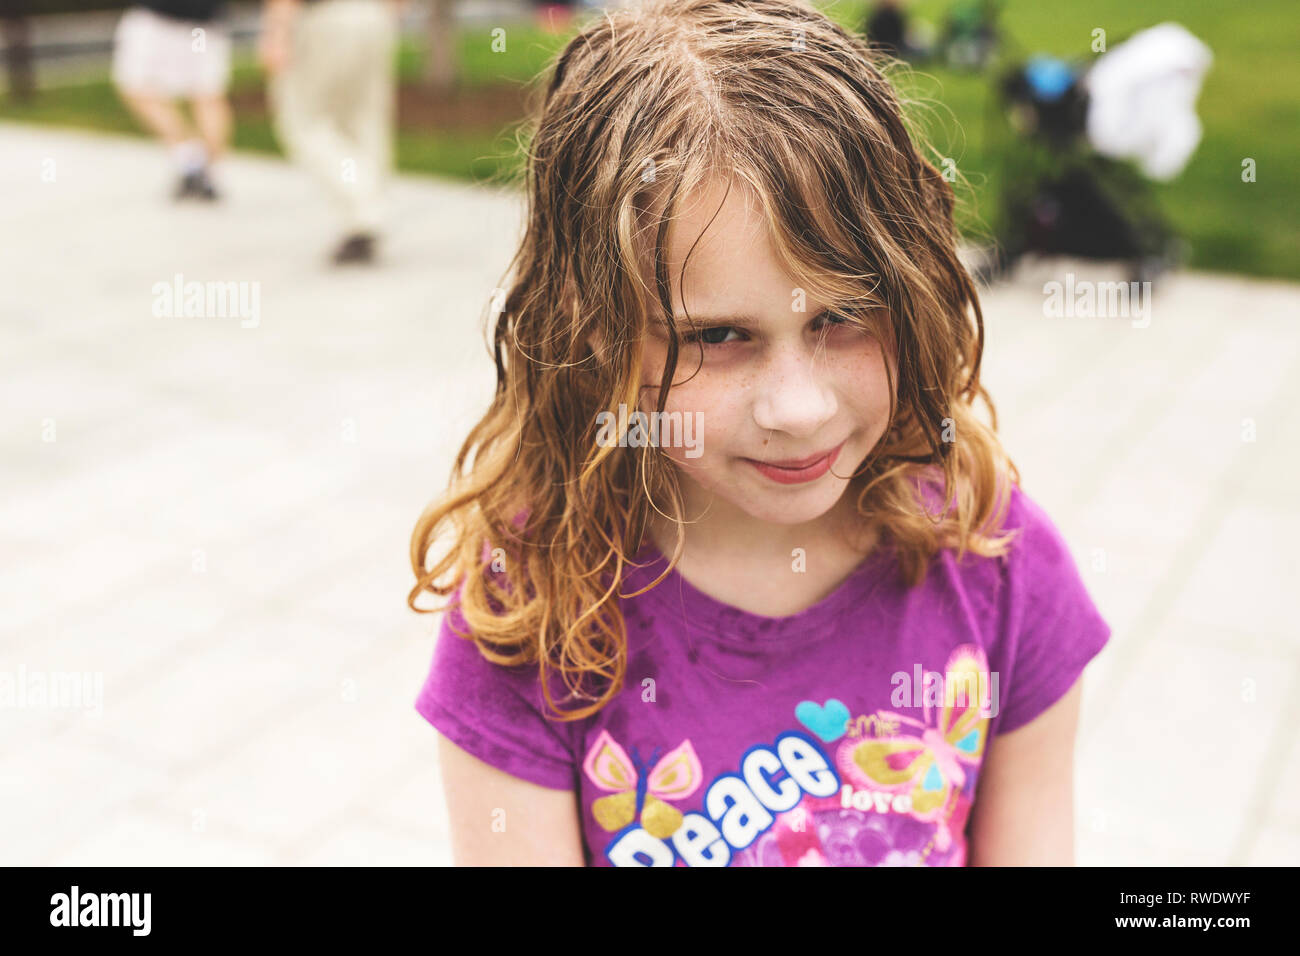 A ten-year-old girl with curly blond wet hair looks unhappy about having her photo taken in a park in Boston, Massachusetts. Stock Photo